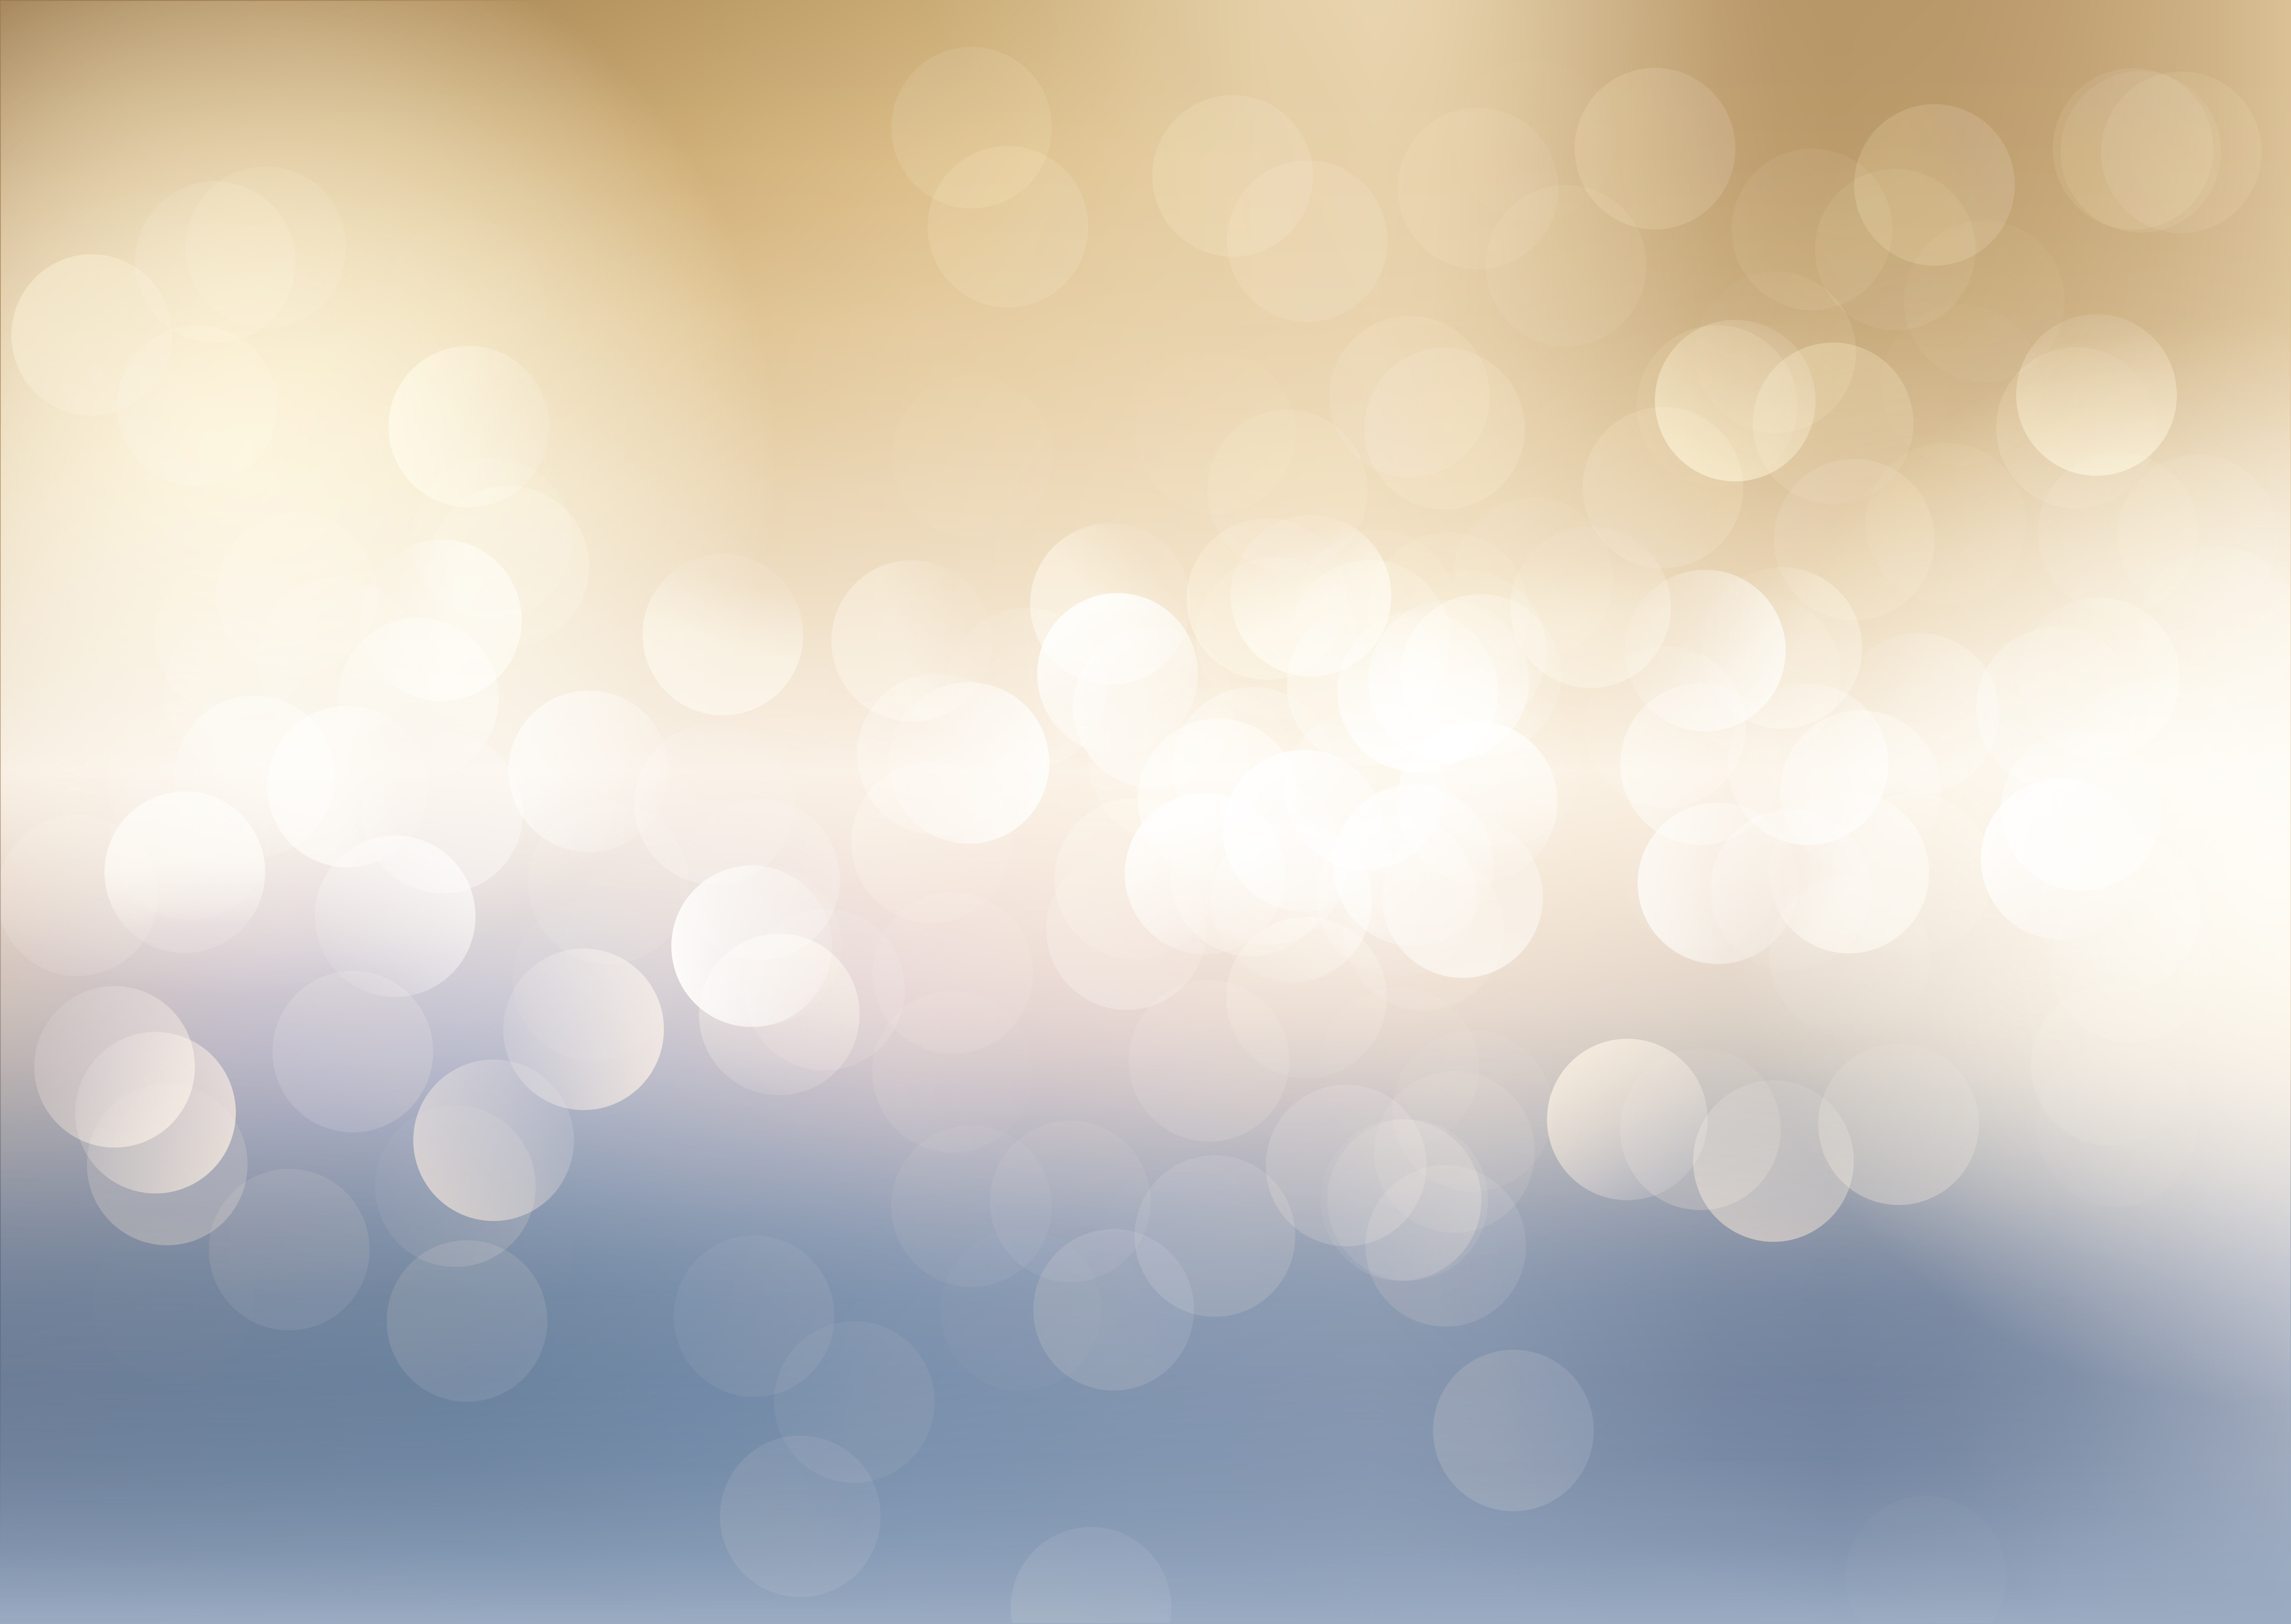 Blue and Gold Bokeh Lights Background 833799 Download Free Vectors